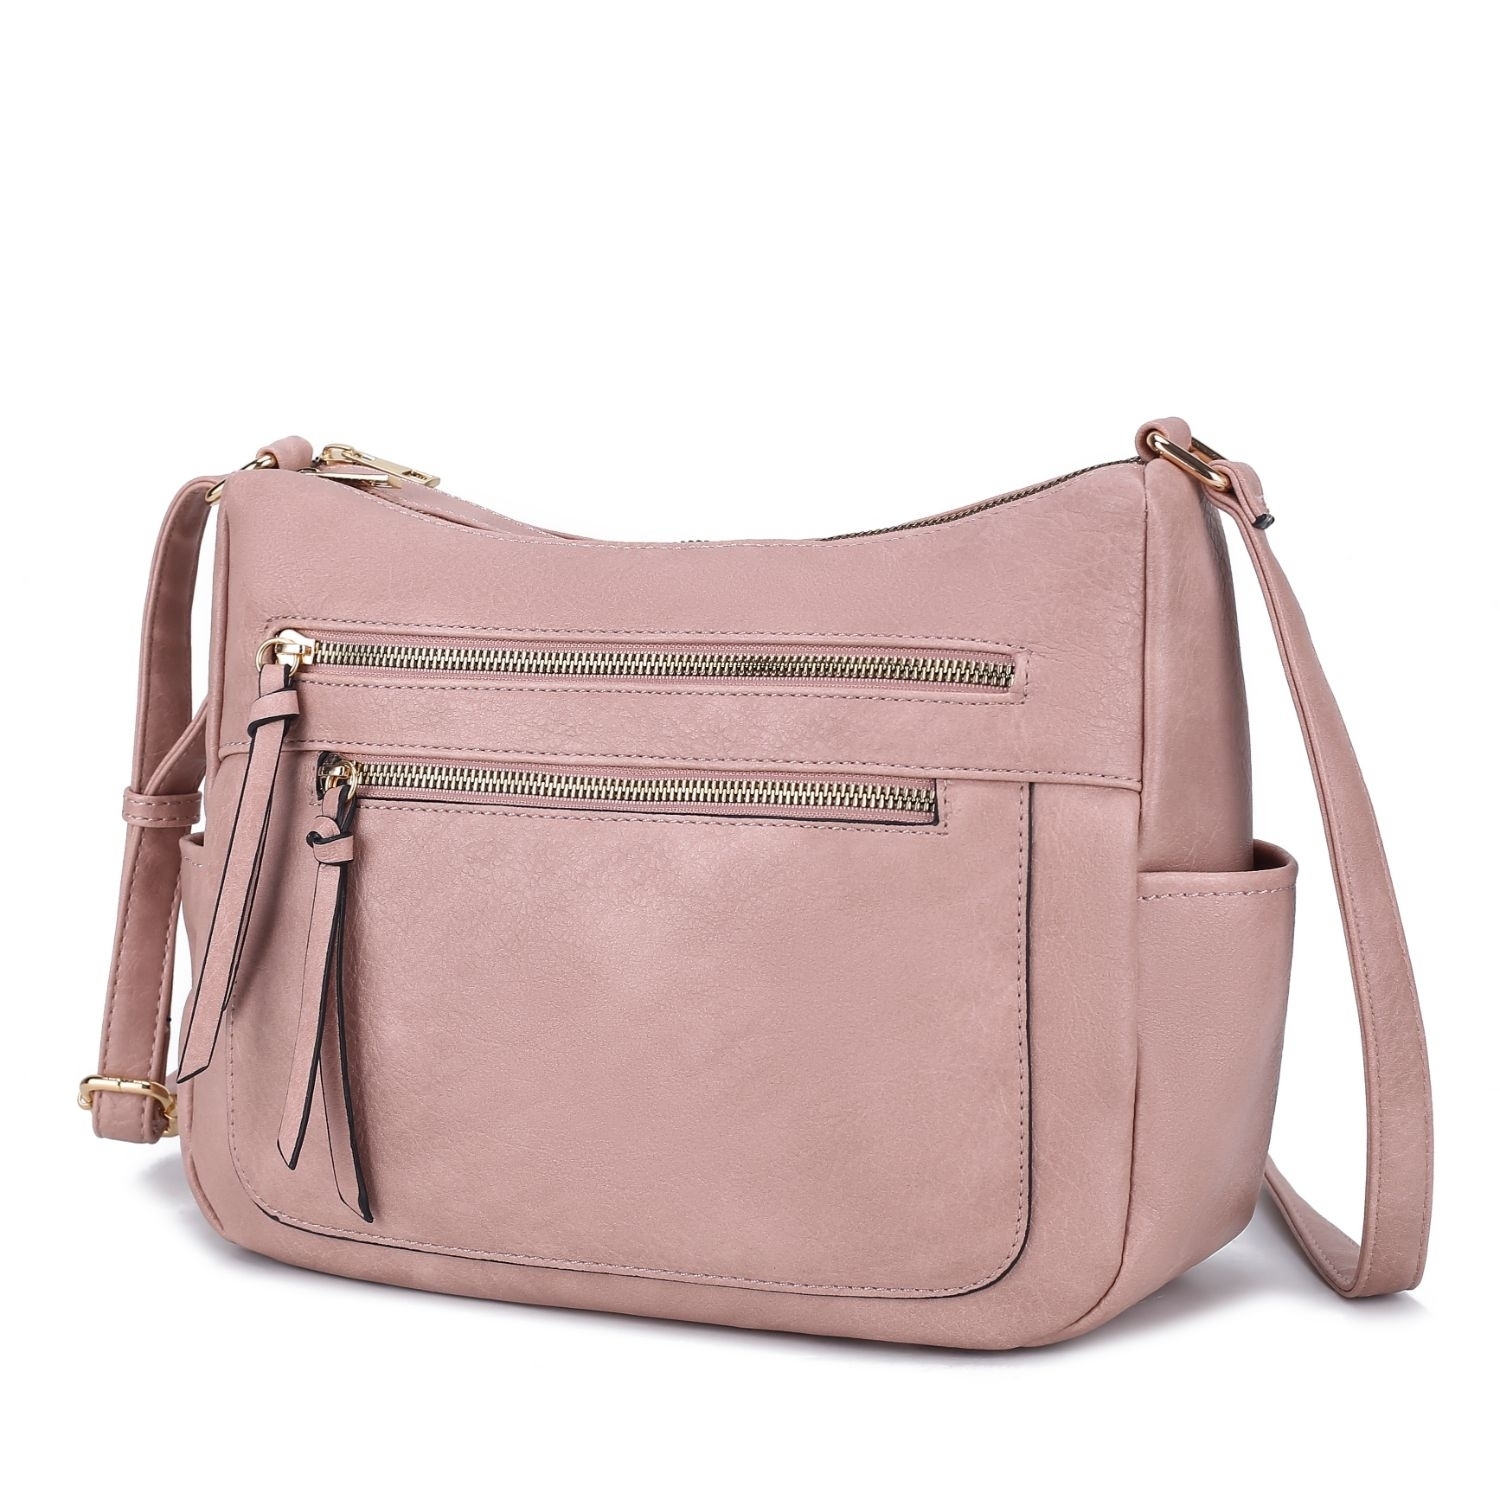 MKF Collection Zilla Vegan Leather Women's Shoulder Bag By Mia K - Pink